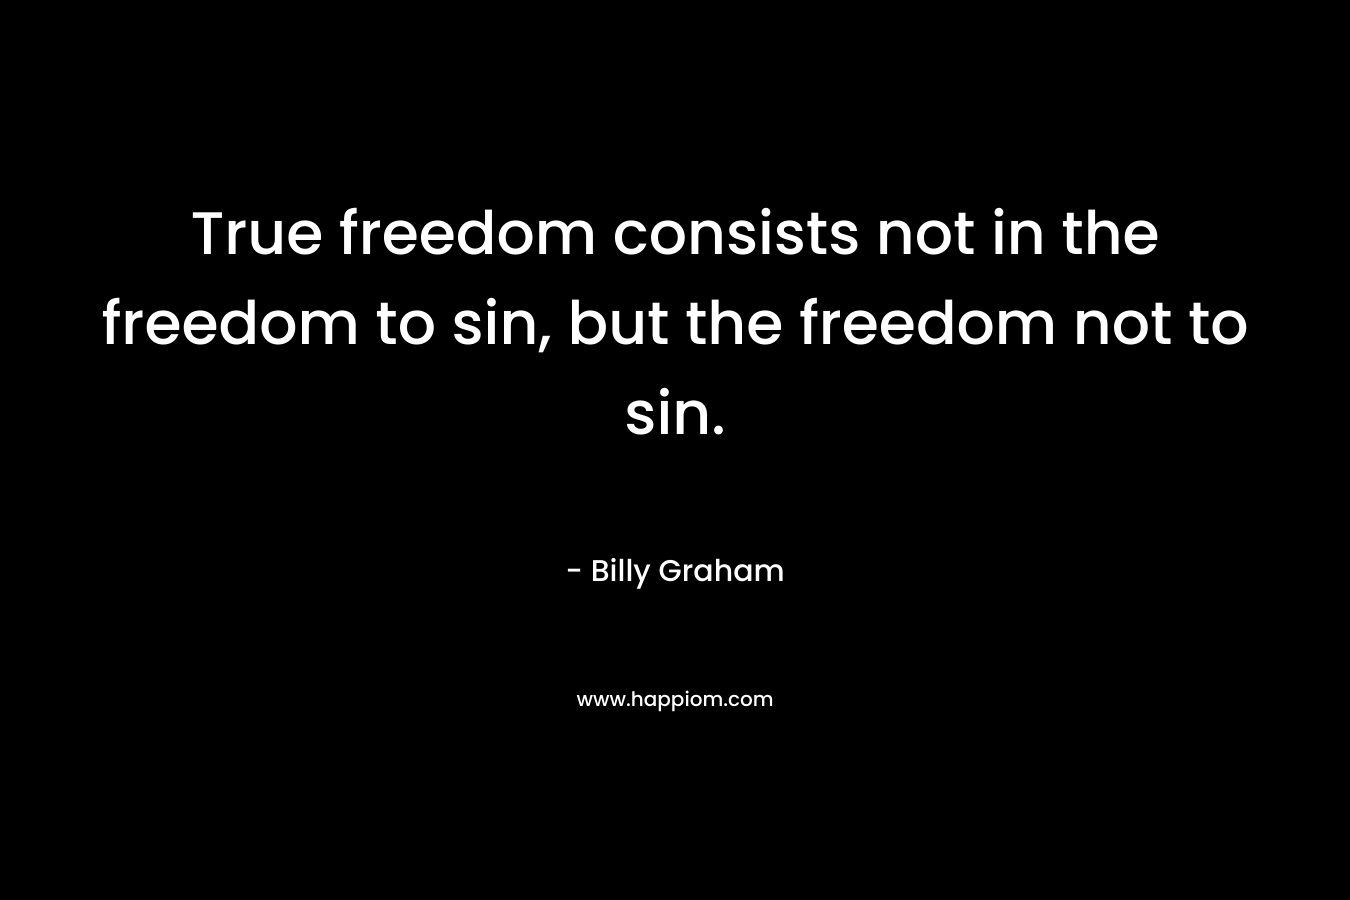 True freedom consists not in the freedom to sin, but the freedom not to sin. – Billy Graham